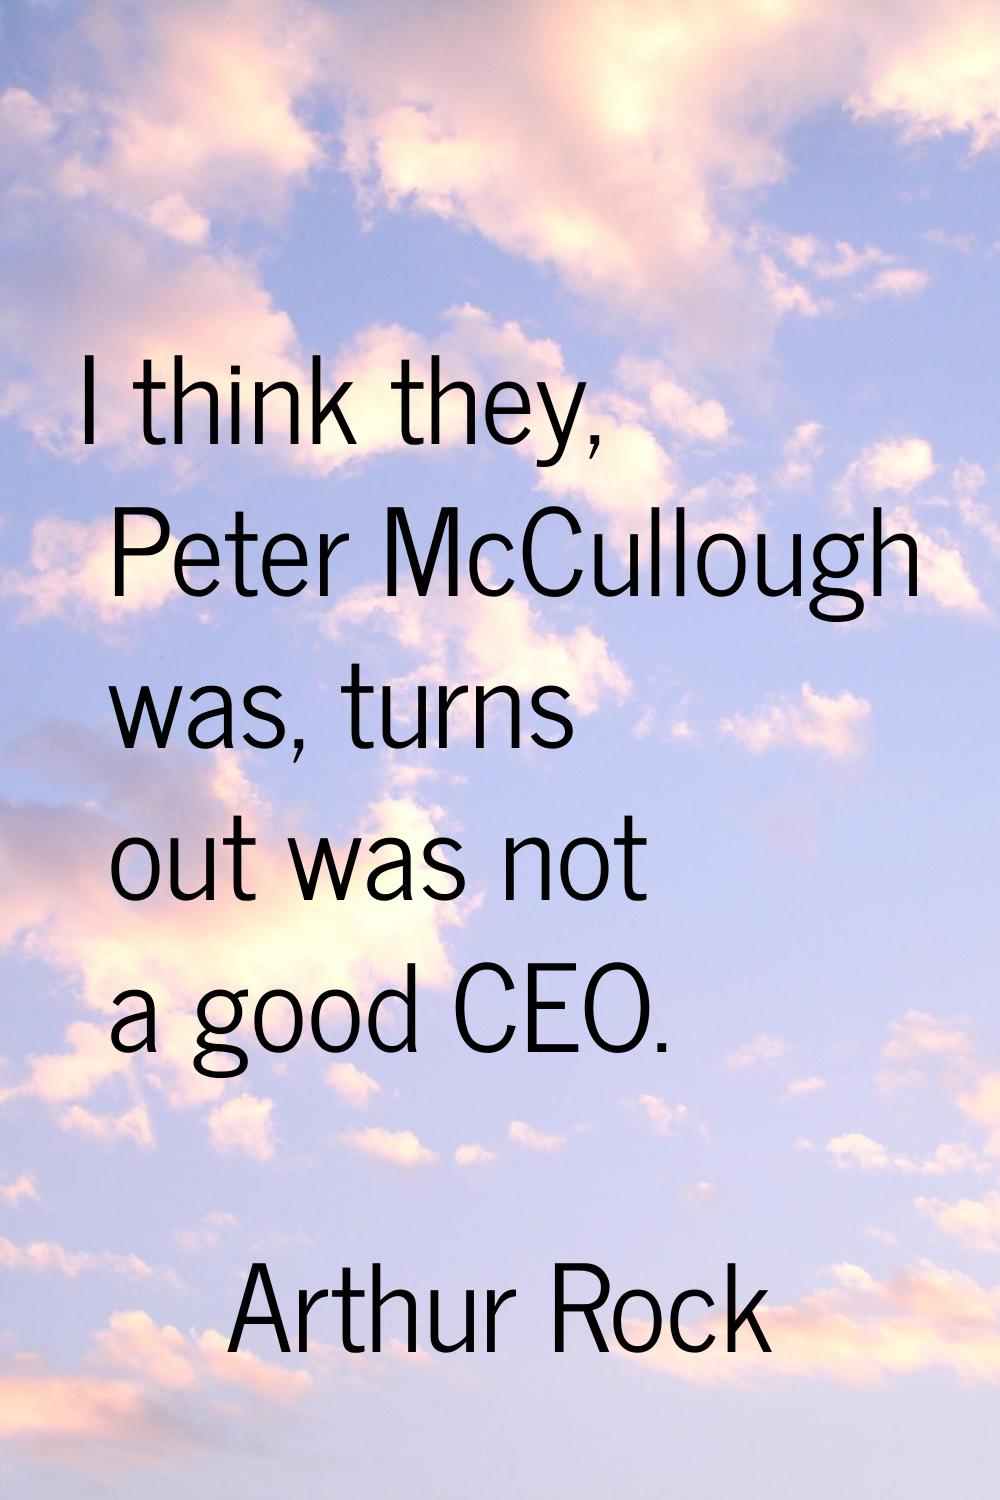 I think they, Peter McCullough was, turns out was not a good CEO.